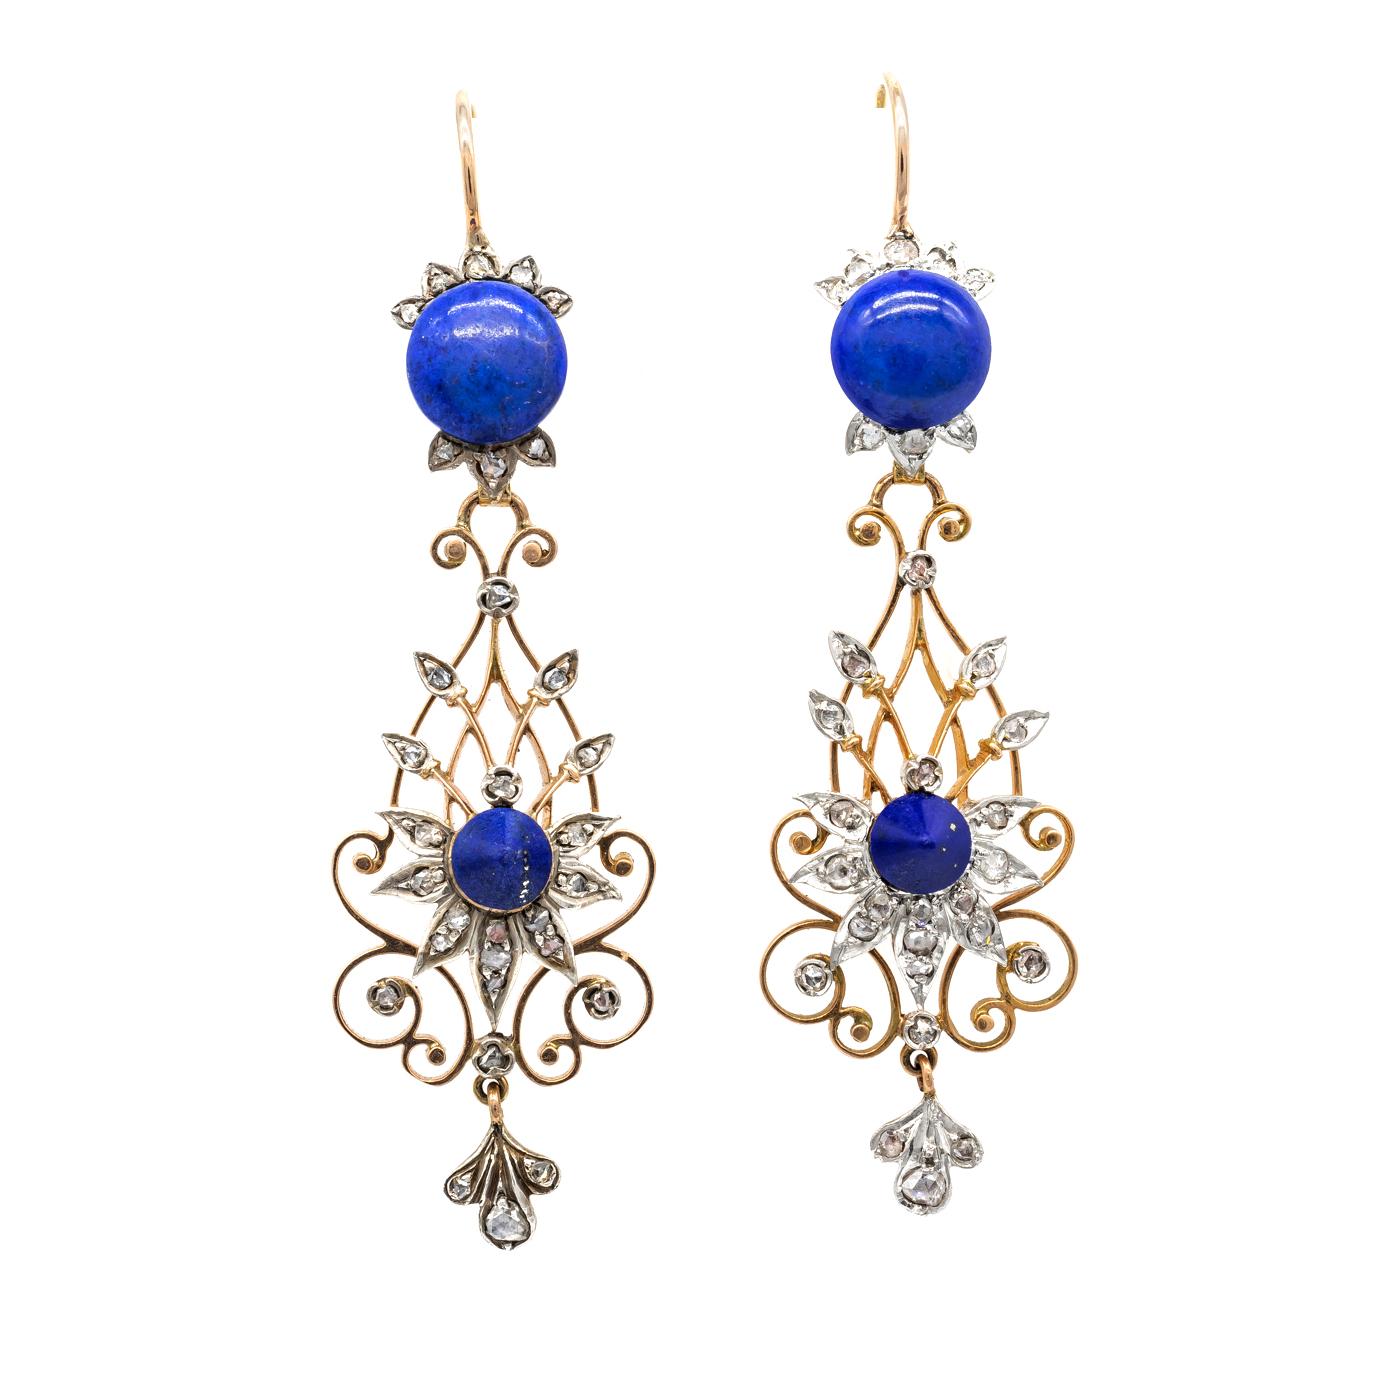 A pair of late Victorian, lapis lazuli and diamond, filigree drop earrings, the tops are set with round, cabochon-cut, lapis lazuli and rose-cut diamonds, suspending a gold, open work, pear shape pendant, with cone shaped lapis lazuli set within a